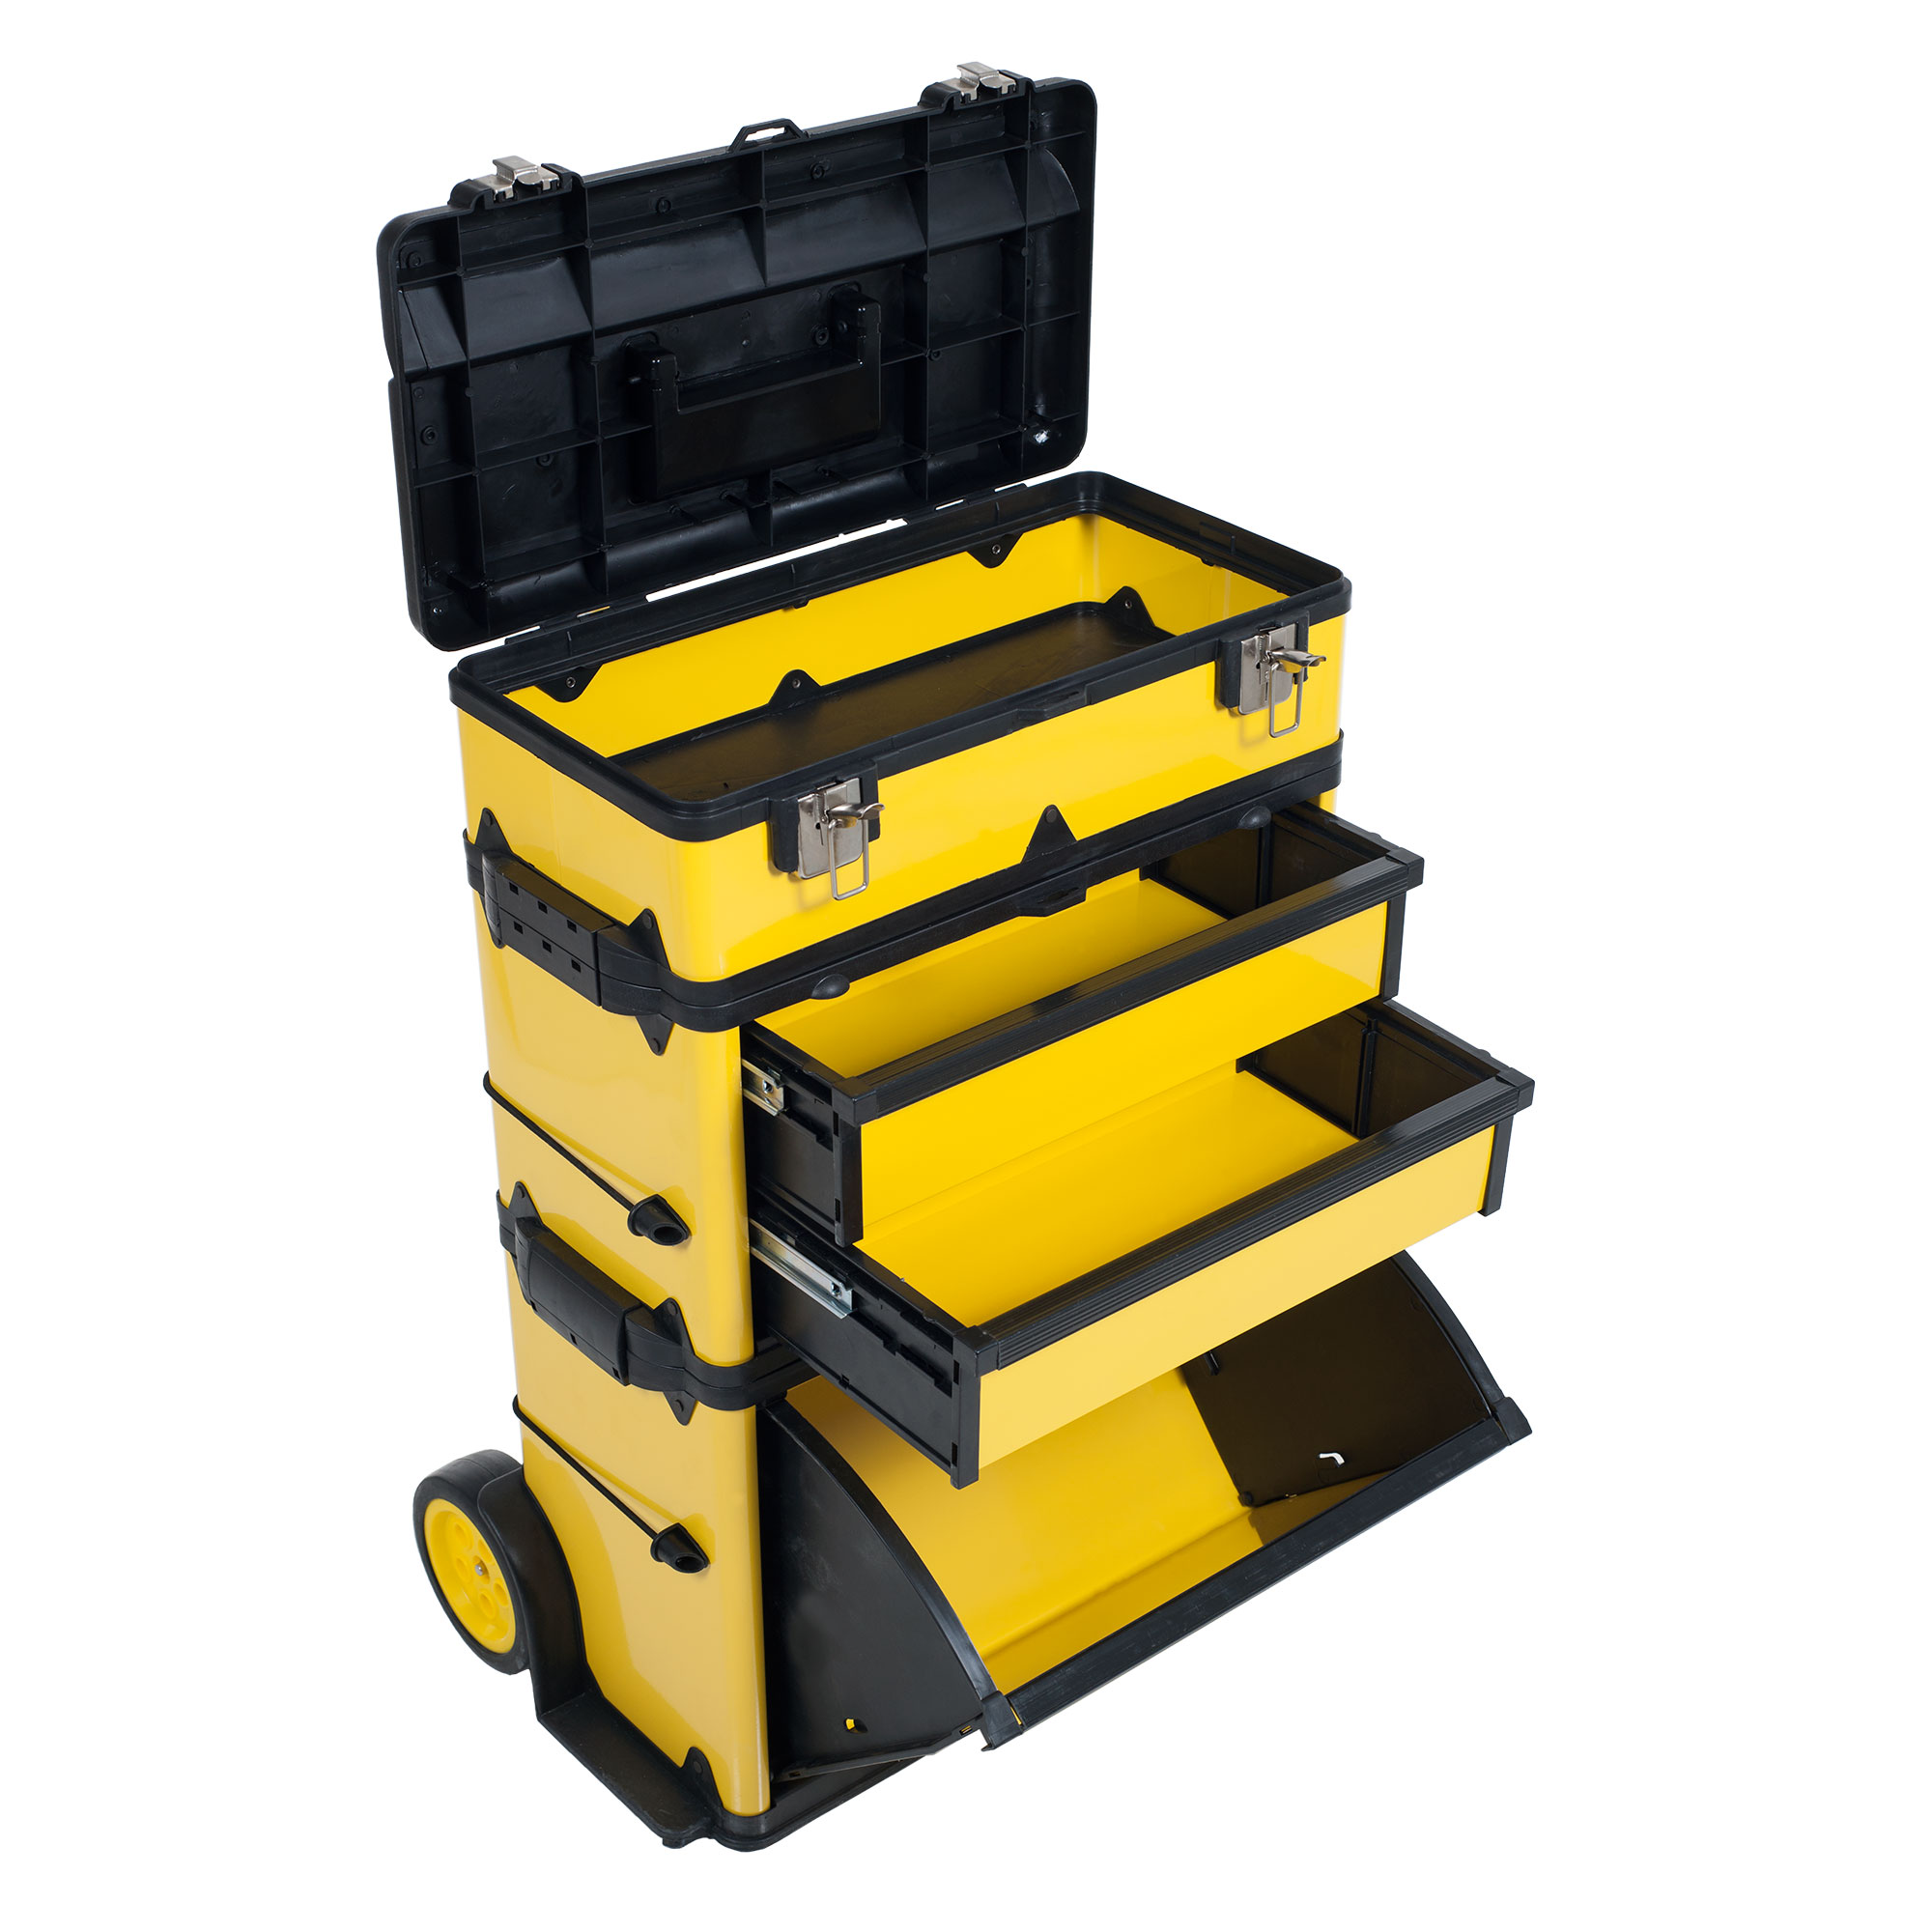 Stackable Toolbox Rolling Mobile Organizer with Telescopic Comfort Grip Handle ? Upright Rigid Pack Out Cart with Wheels and Drawers by Stalwart - image 4 of 9